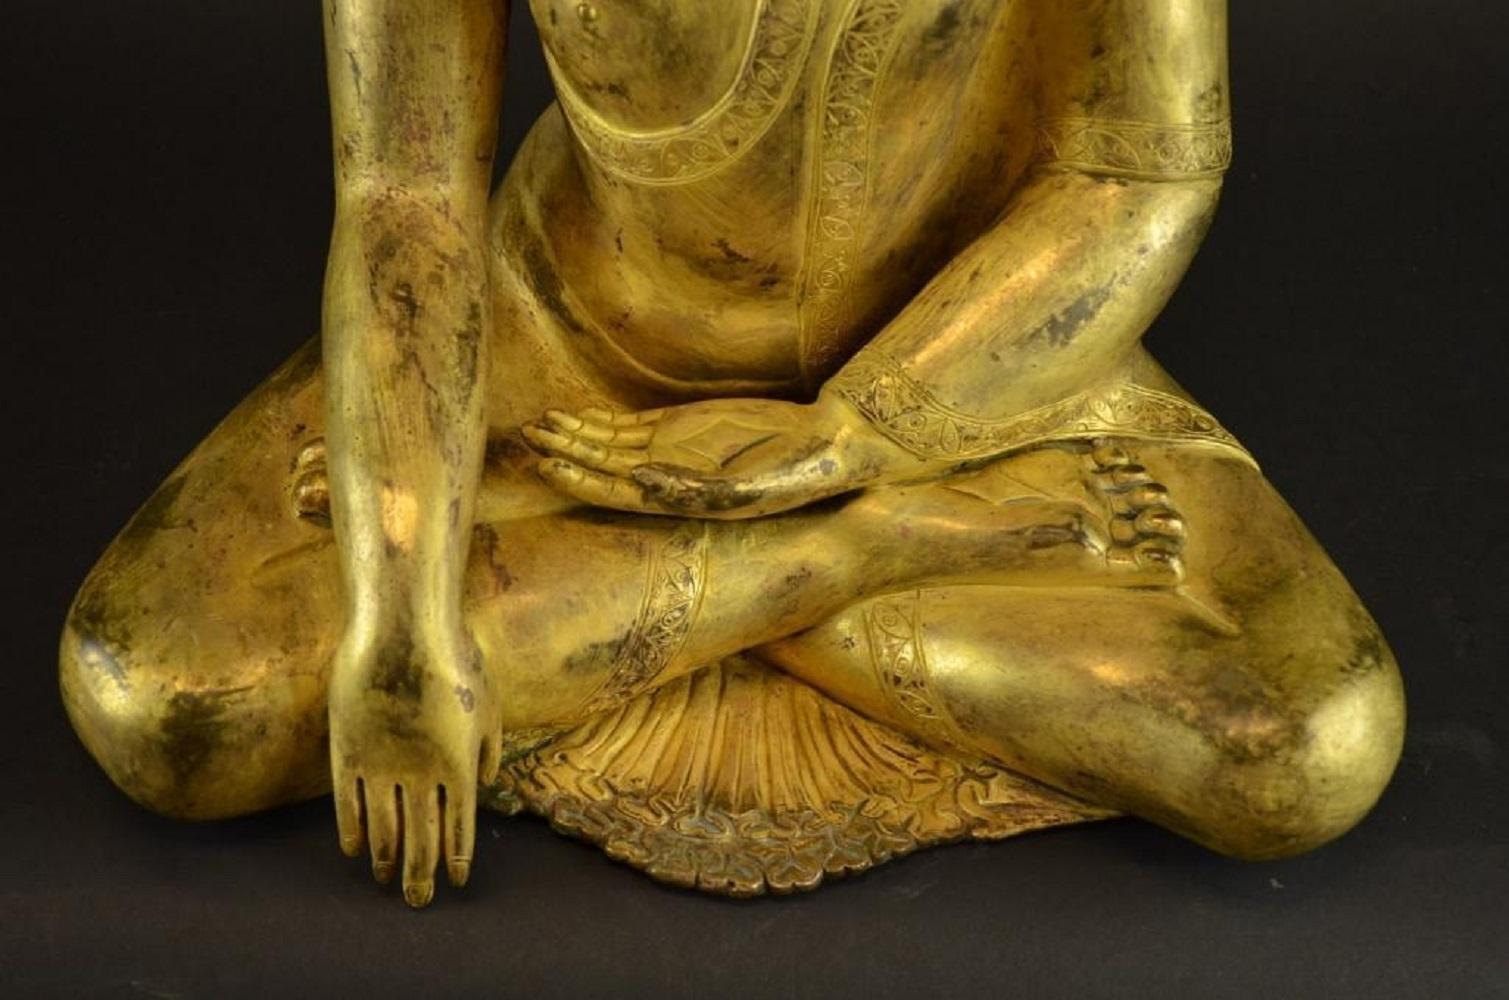 Antique Tibetan Gilt Bronze Seated Buddha - Other Art Style Sculpture by Unknown